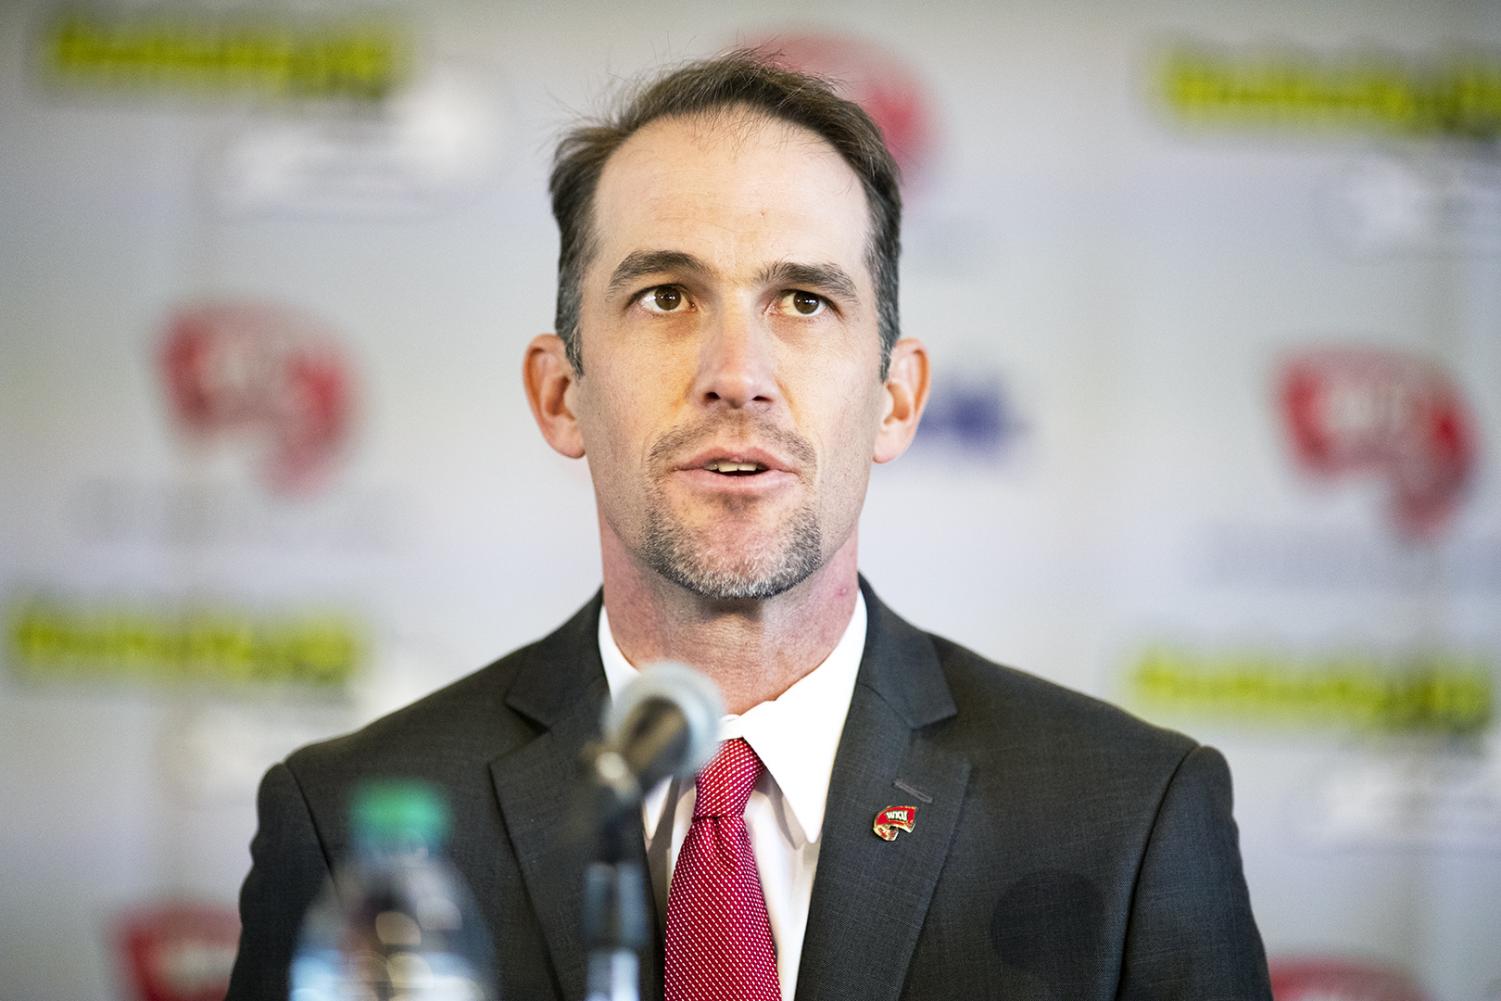 Tyson Helton is the Men’s Football coach for WKU. He is paid $918,000 per year, which is $470.80 per hour.